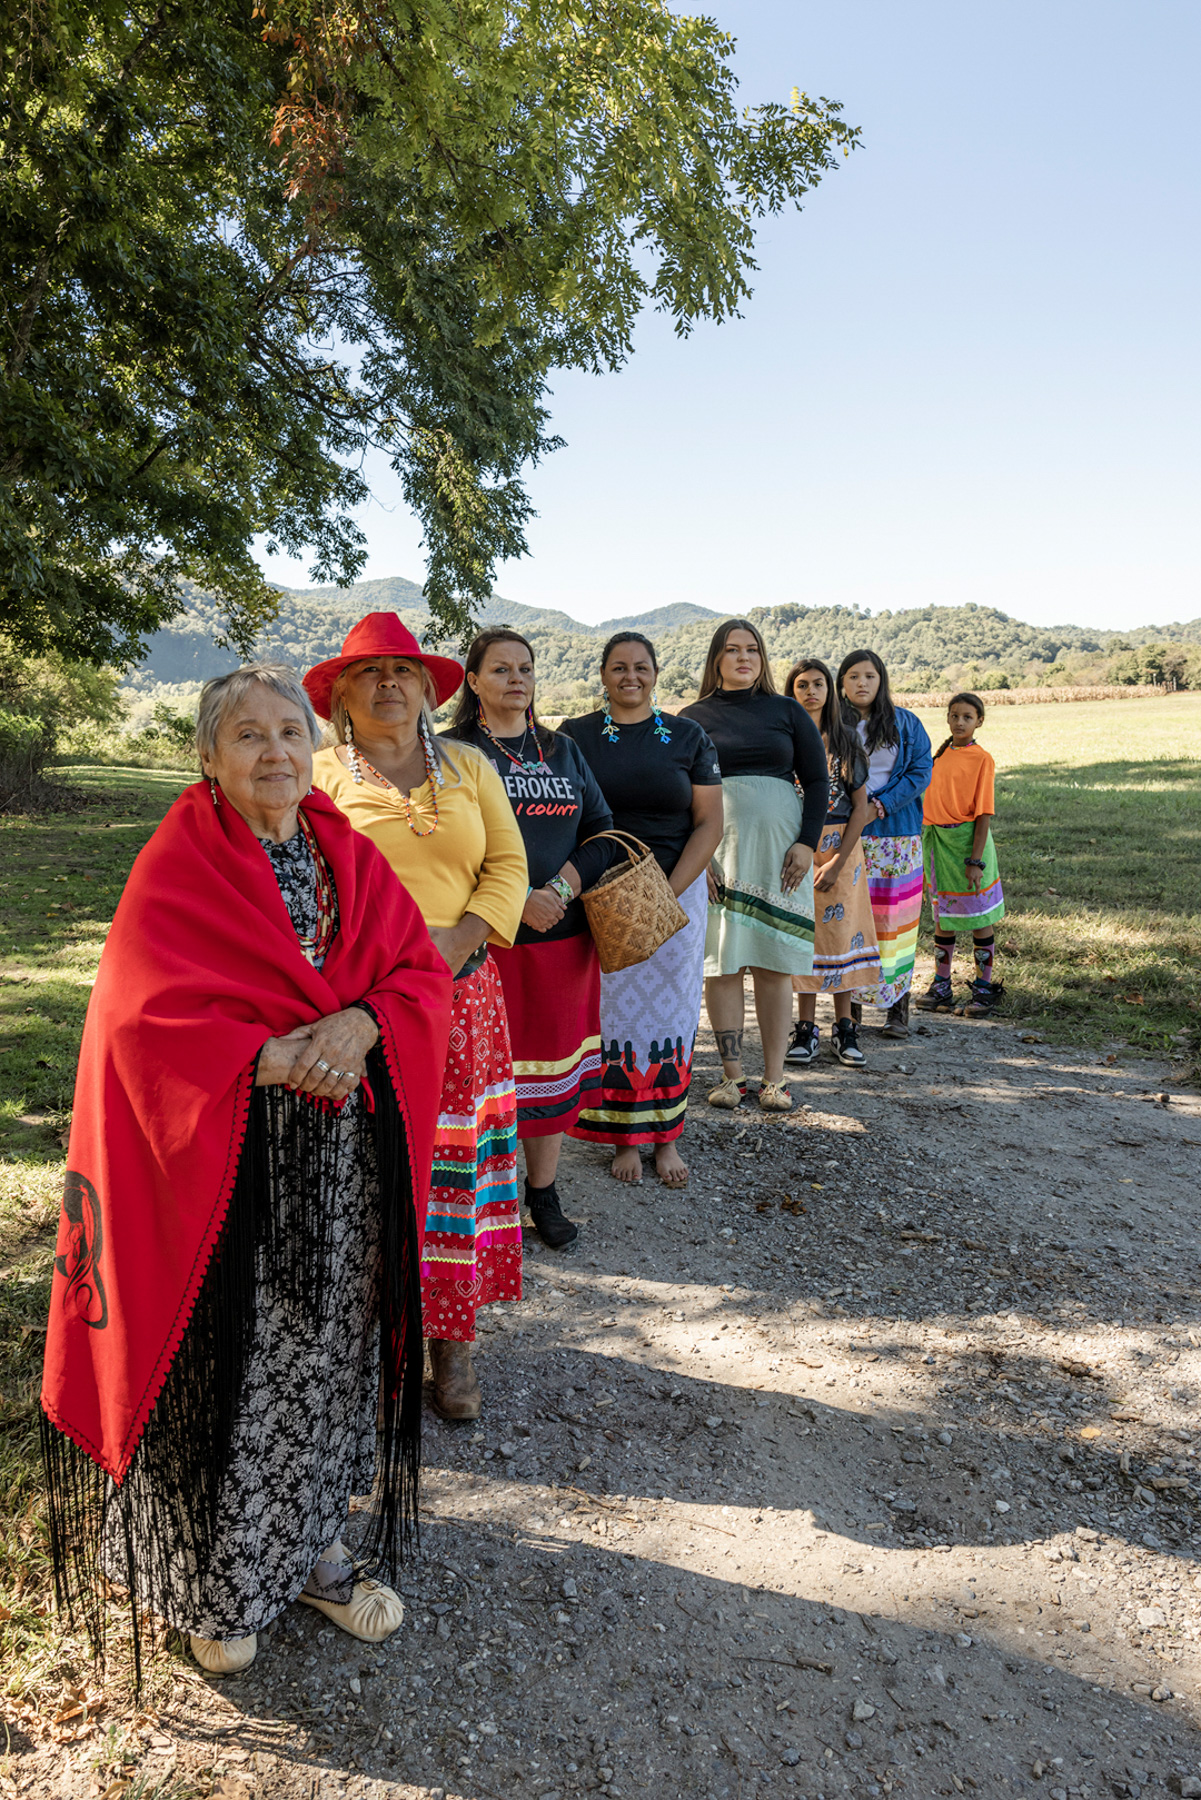 I-tsu-la (Together). The path of a Cherokee woman isn’t walked alone. We walk behind our elders to receive wisdom. We walk in front of the next generation to protect them. We walk beside Ancestors’ shadows to receive the strength to be resilient.-Beloved Woman Carmelita Monteith, Nikki, Anita, Kimberly, Faith, Jasmine, Zailyana, Janée.